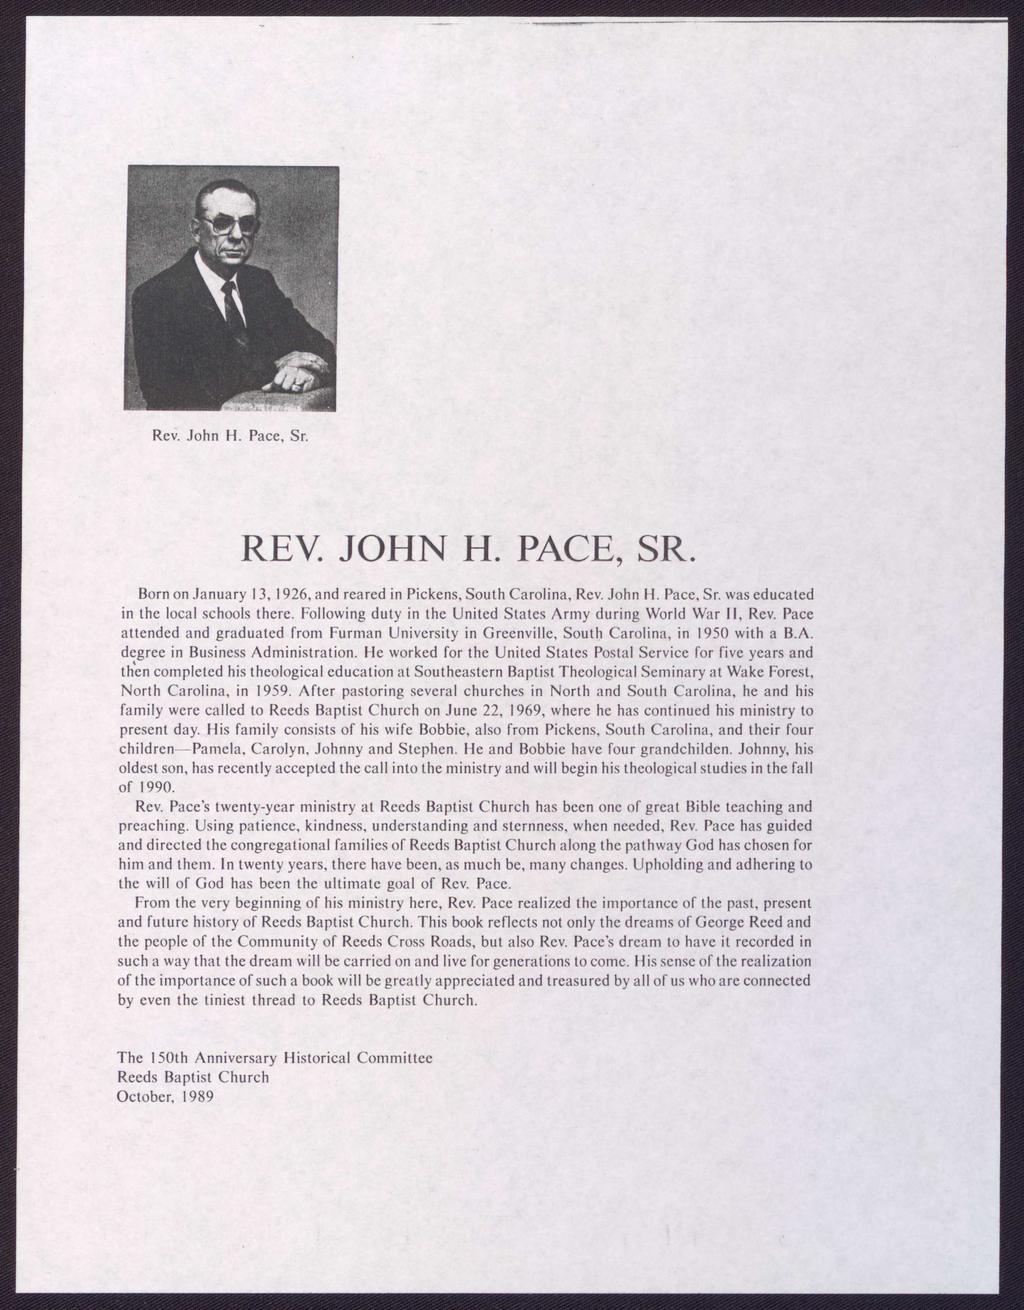 Rev. John H. Pace, Sr. REV. JOHN H. PACE, SR. Born on January 13, 1926, and reared in Pickens, South Carolina, Rev. John H. Pace, Sr. was educated in the local schools there.